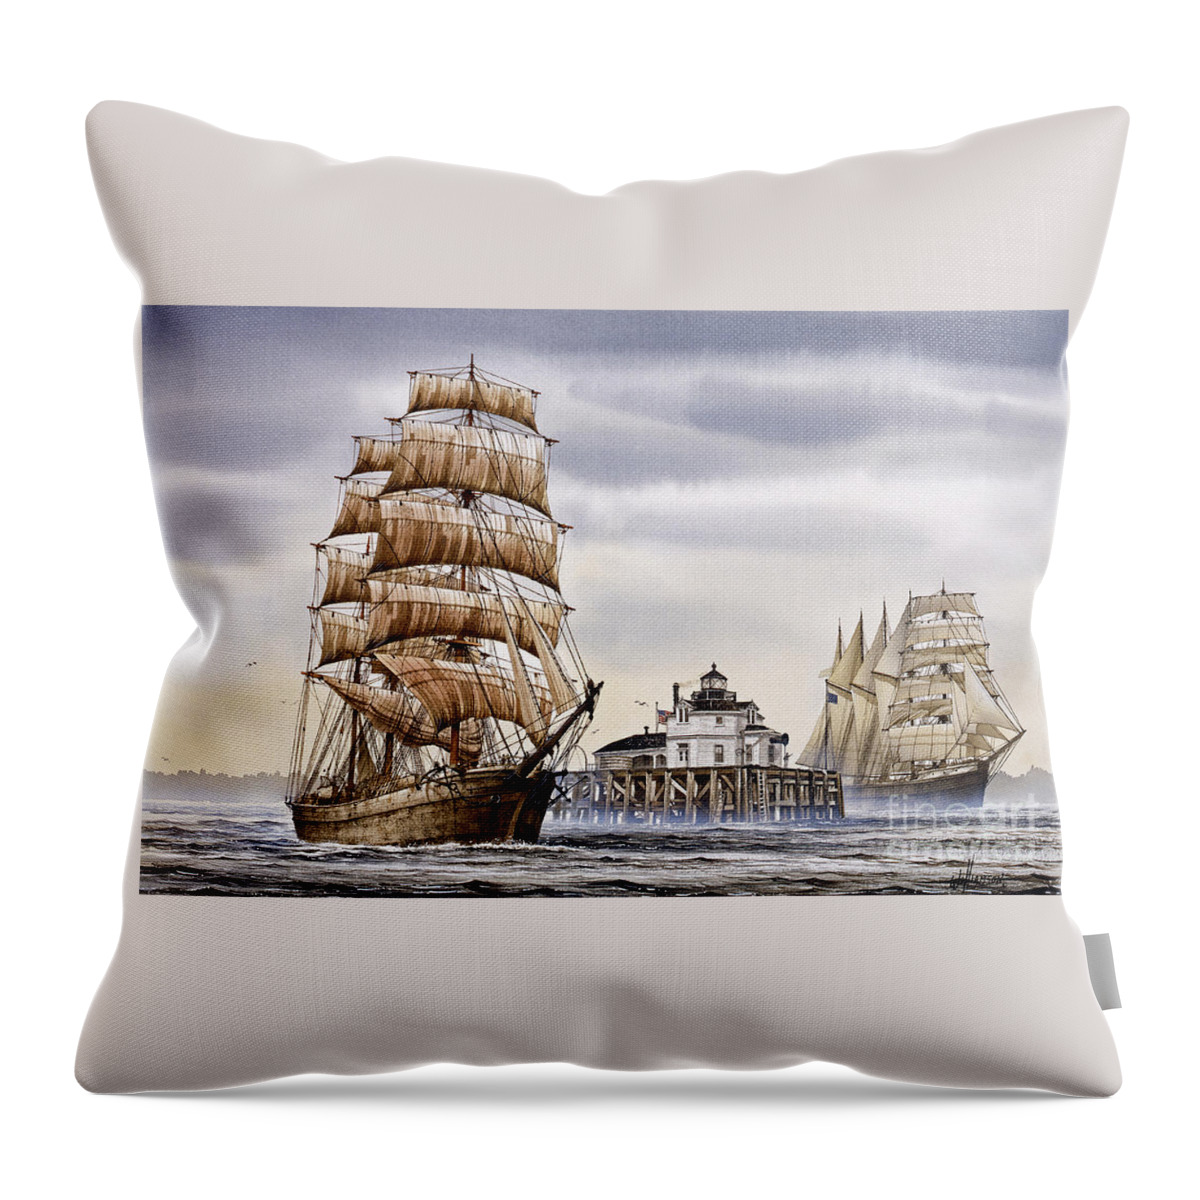 Tall Ship Print Throw Pillow featuring the painting Semi-ah-moo Lighthouse by James Williamson